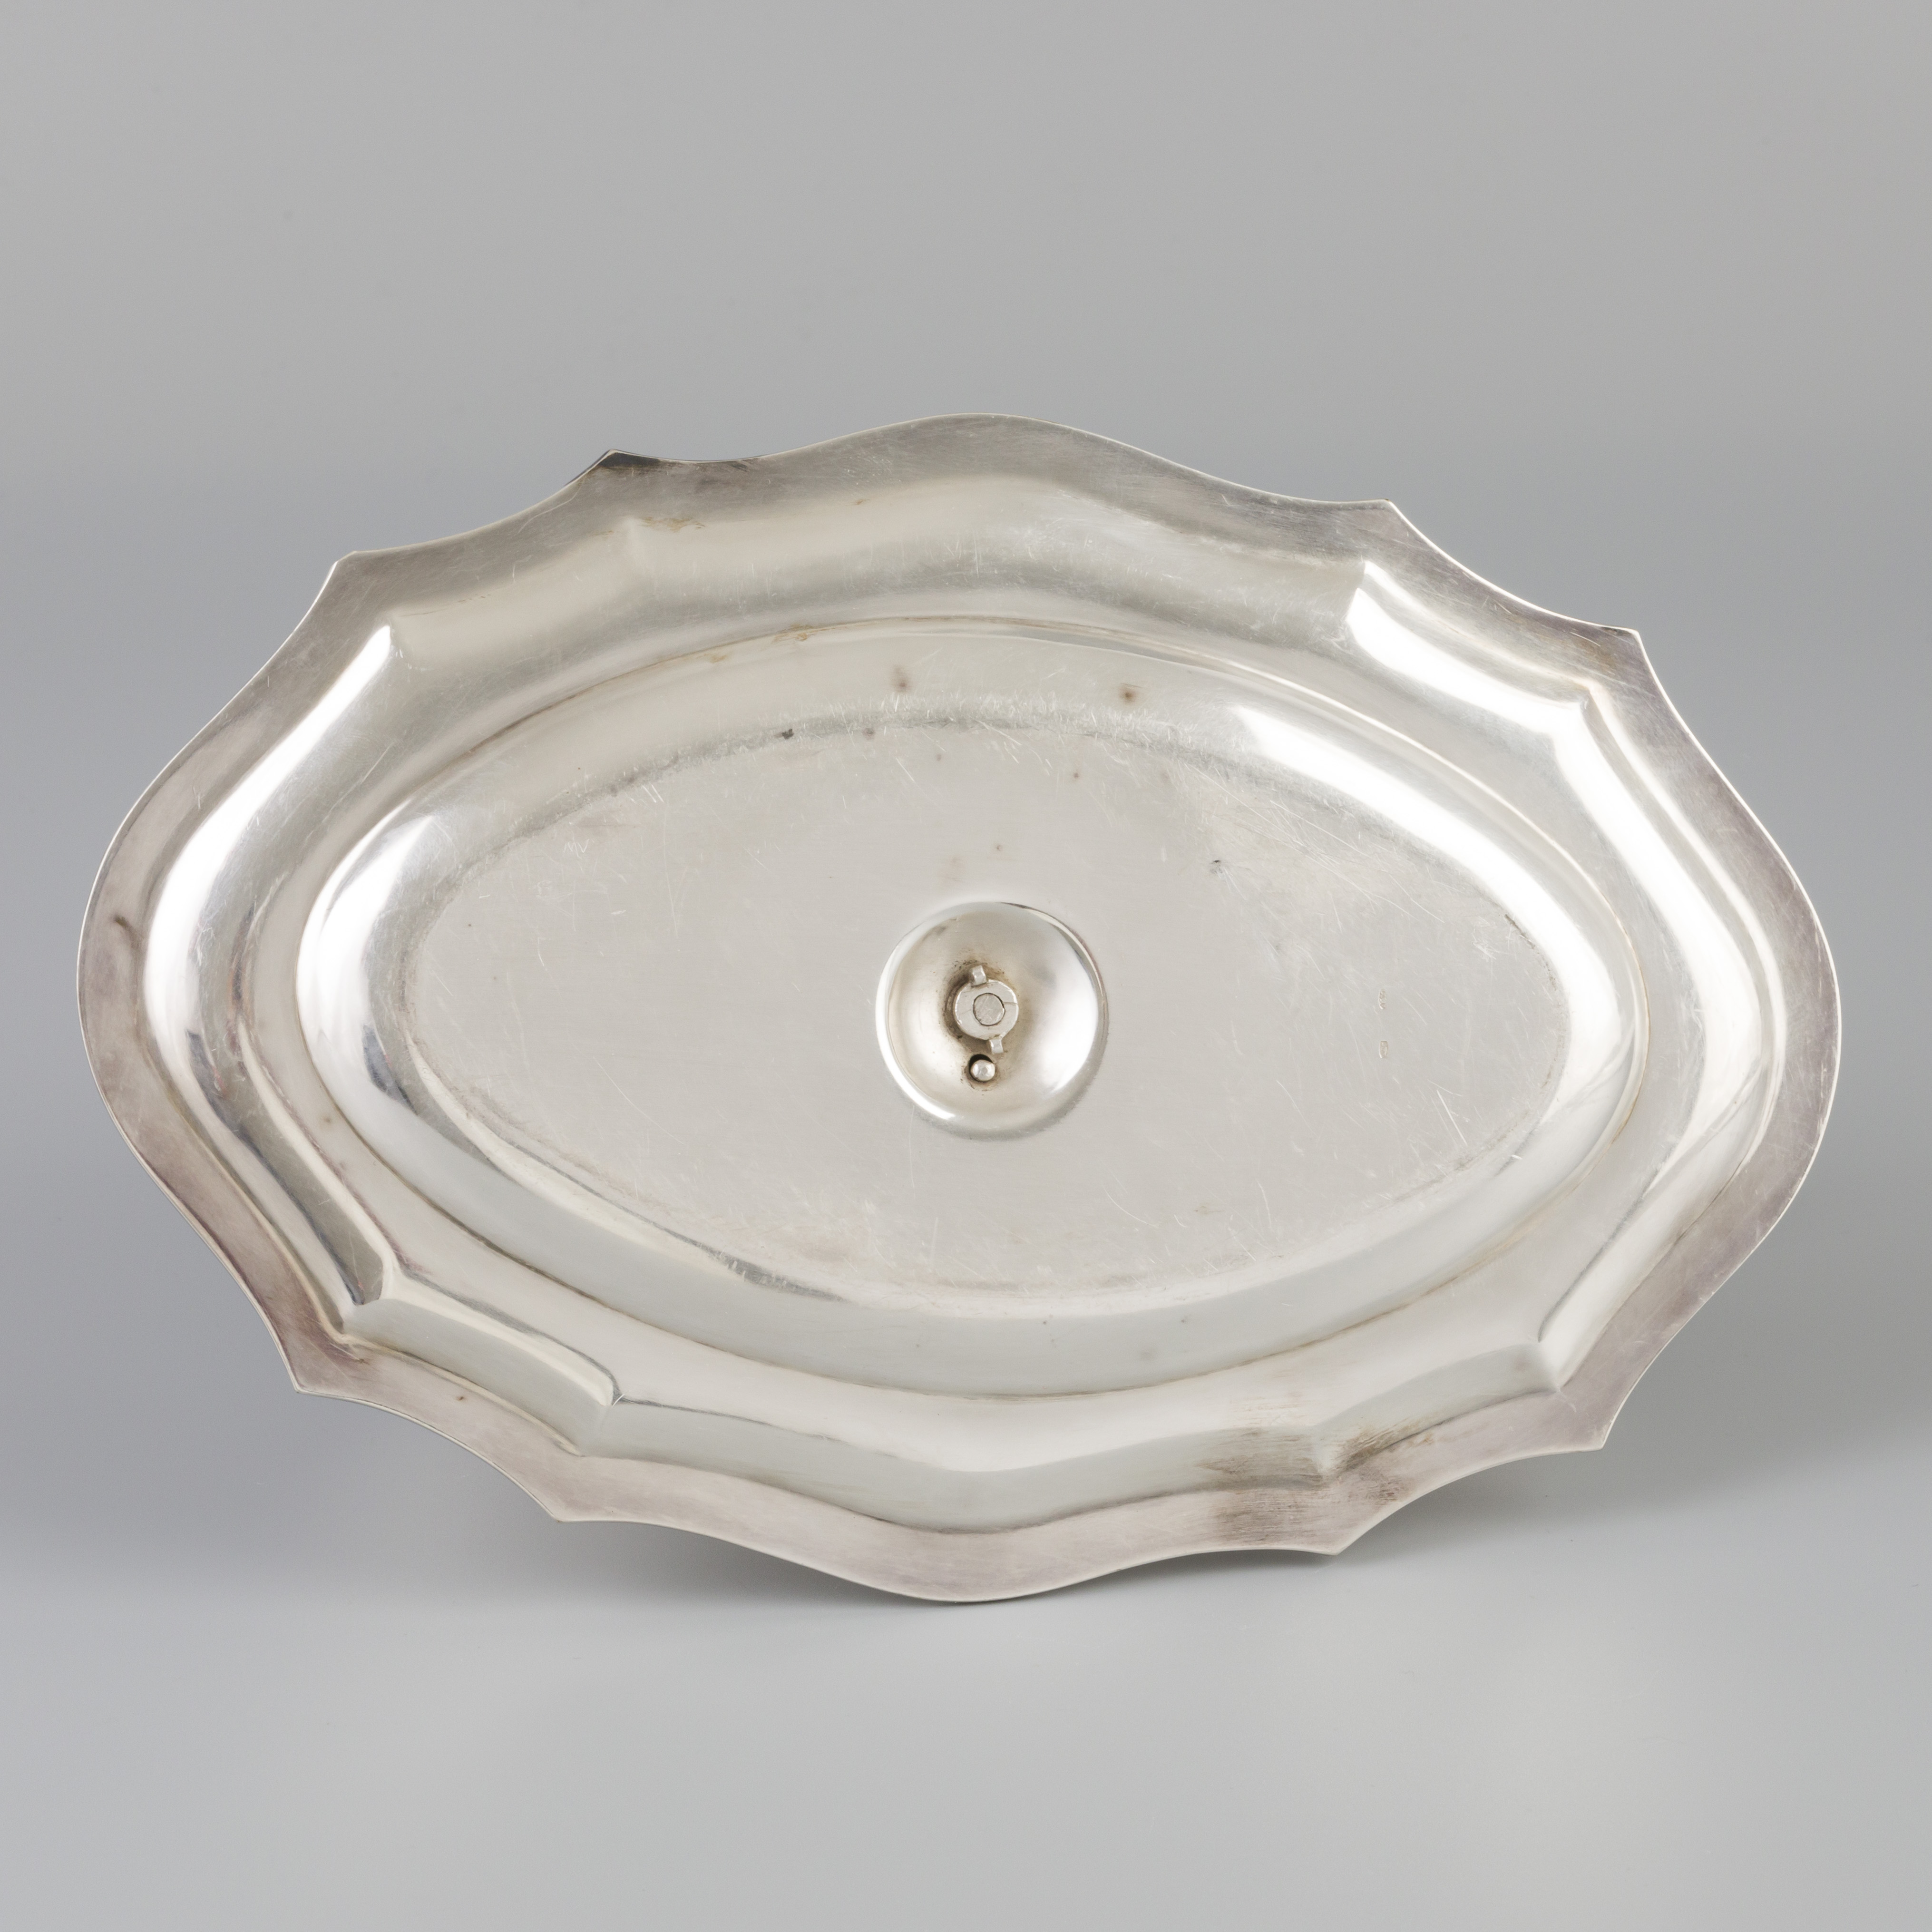 Sauce boat with silver saucer. - Image 4 of 5